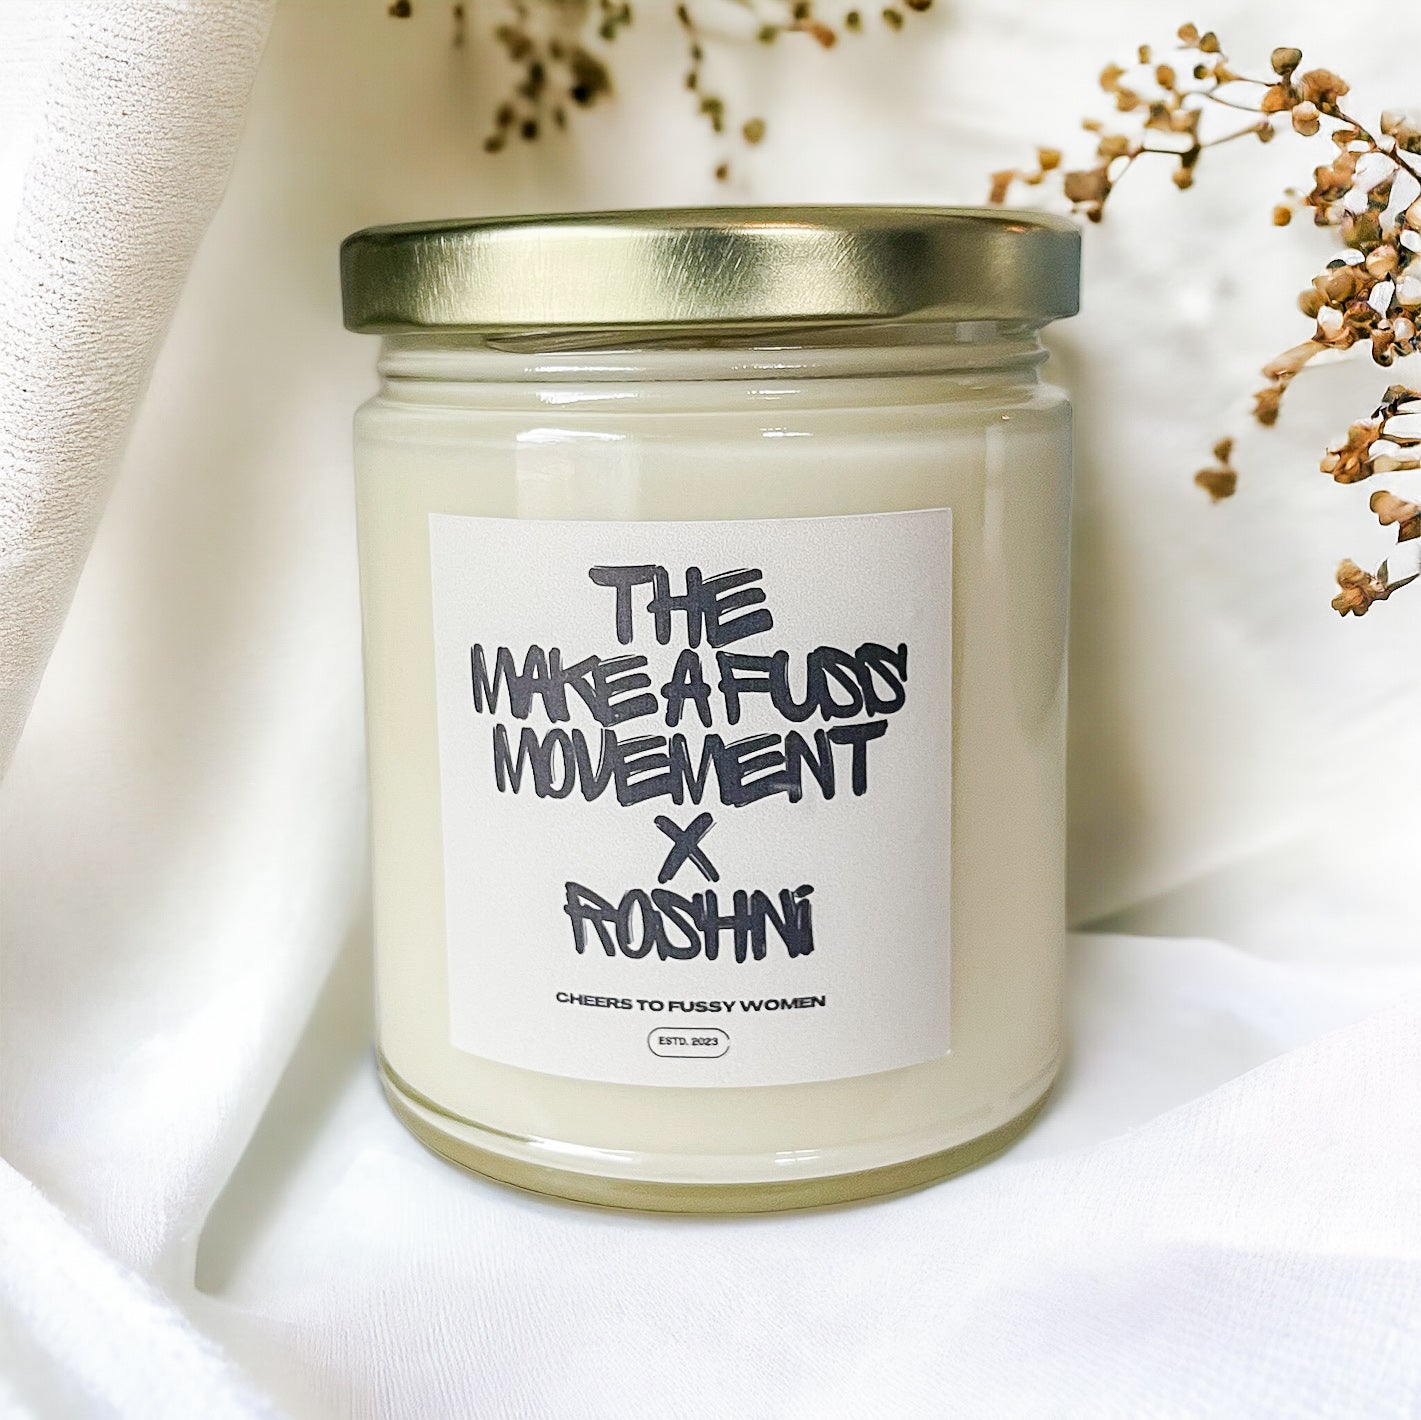 Cheers to Fussy Women Candle | Make a Fuss Movement x Roshni